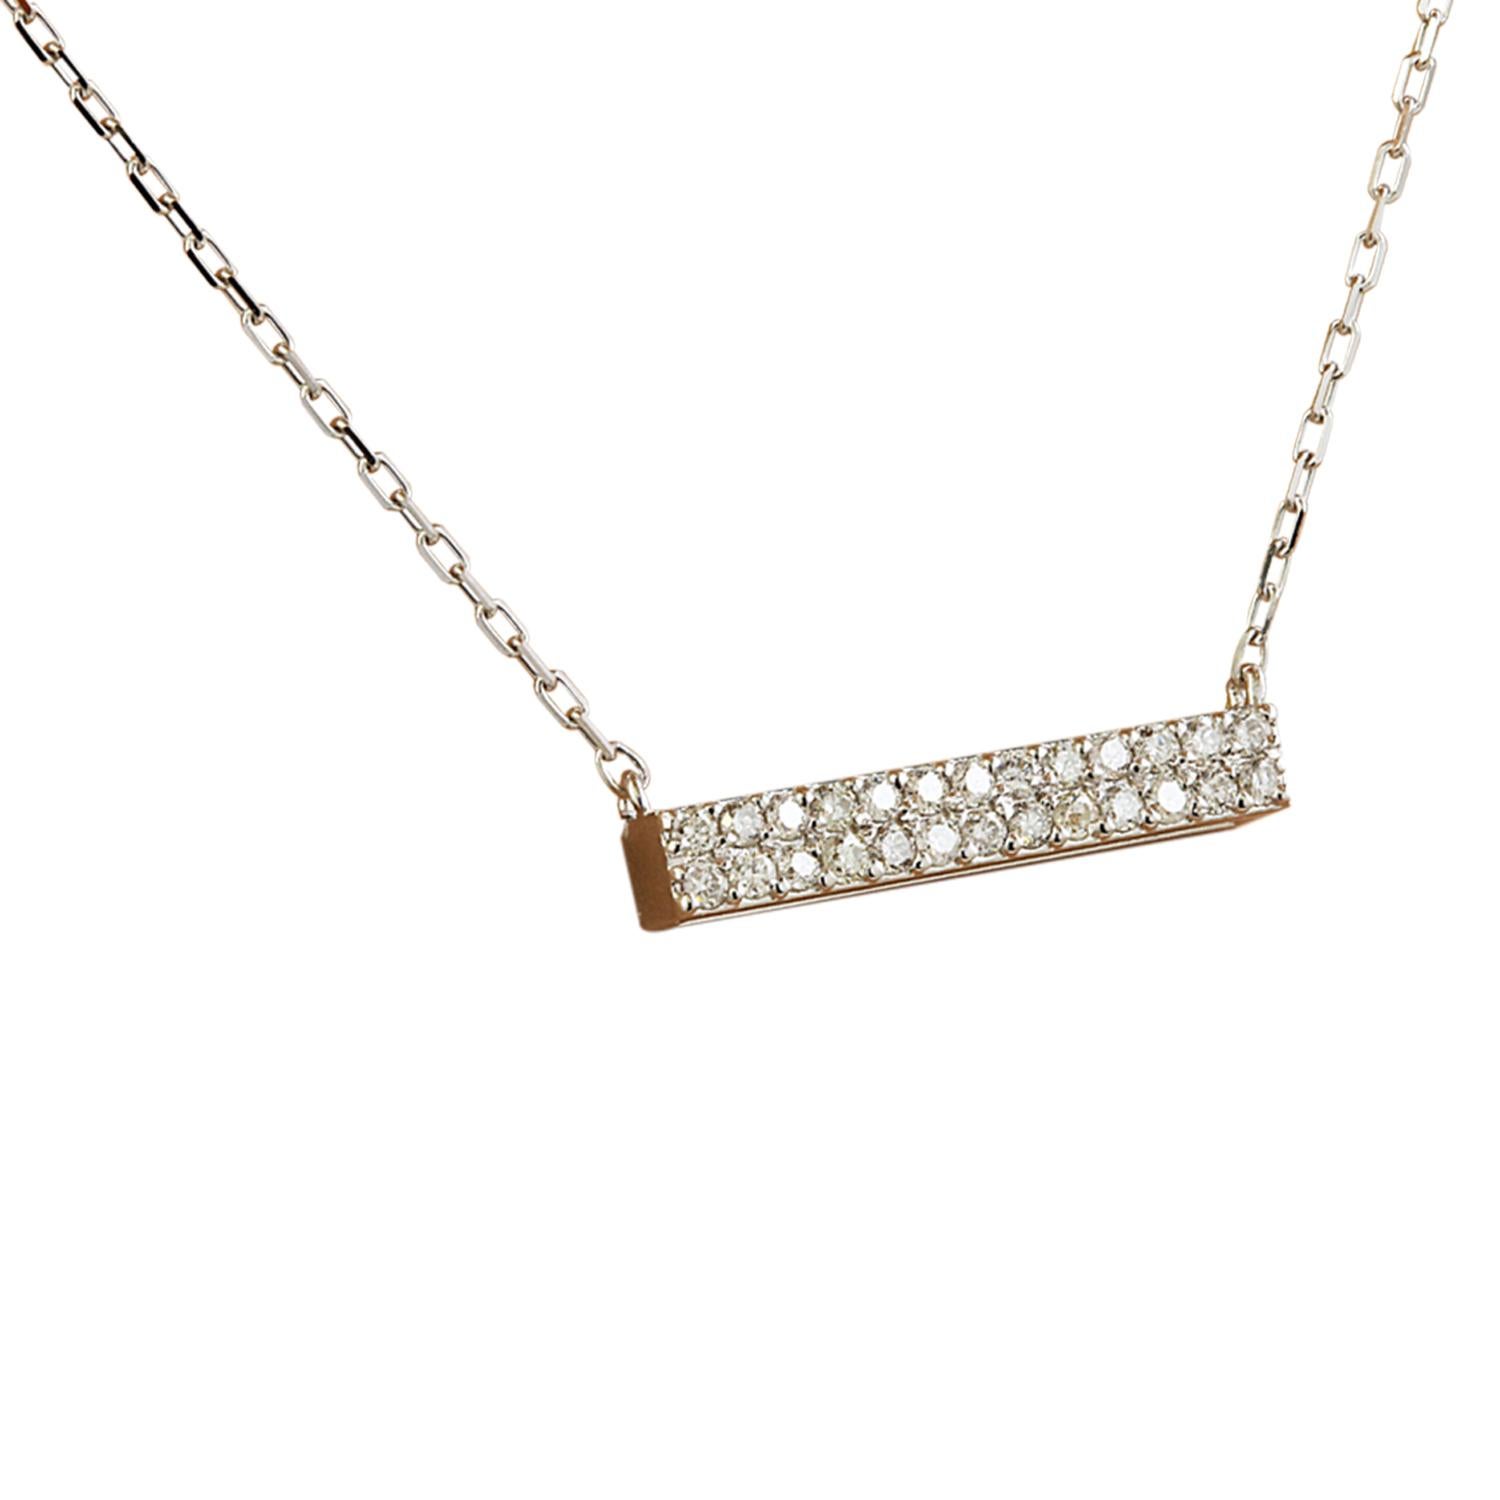 Introducing our exquisite 0.40 Carat Natural Diamond Bar Necklace in 14 Karat White Gold. Stamped with 14K authenticity, this necklace weighs 2 grams and has a length of 16 inches. Adorning the necklace is a total of 26 natural diamonds, weighing